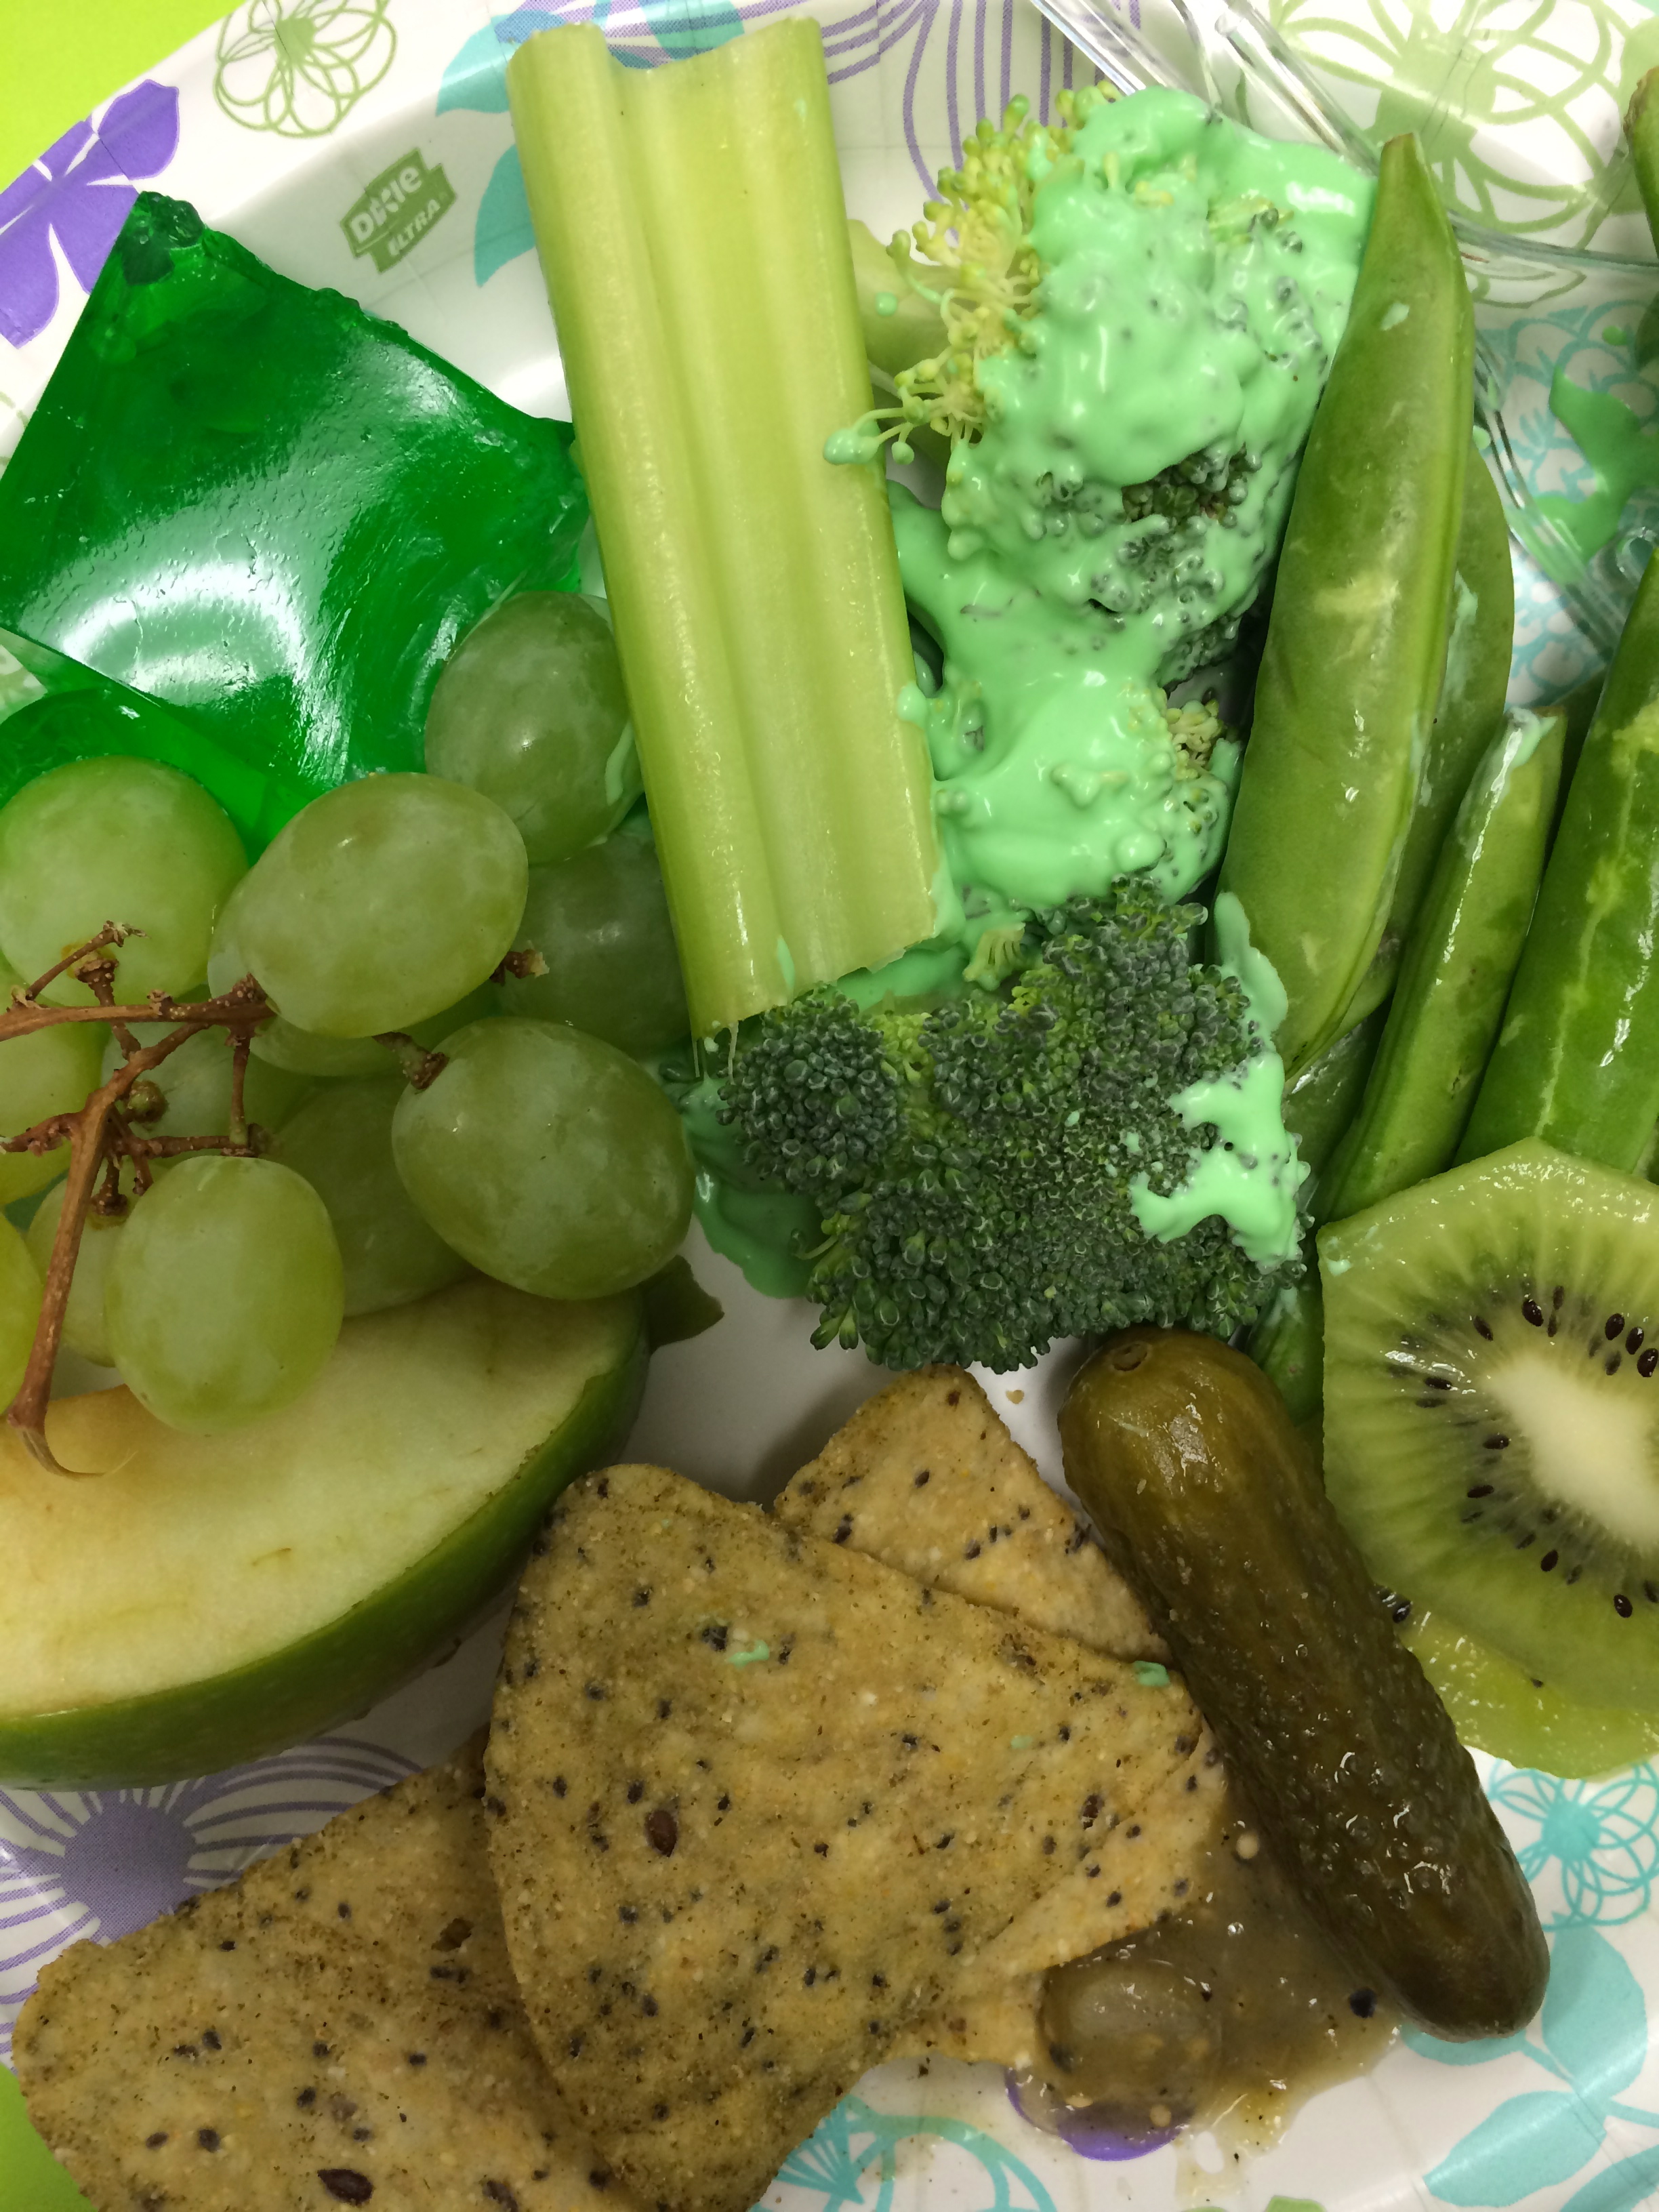 A St. Patrick's Day Green Potluck in the Classroom